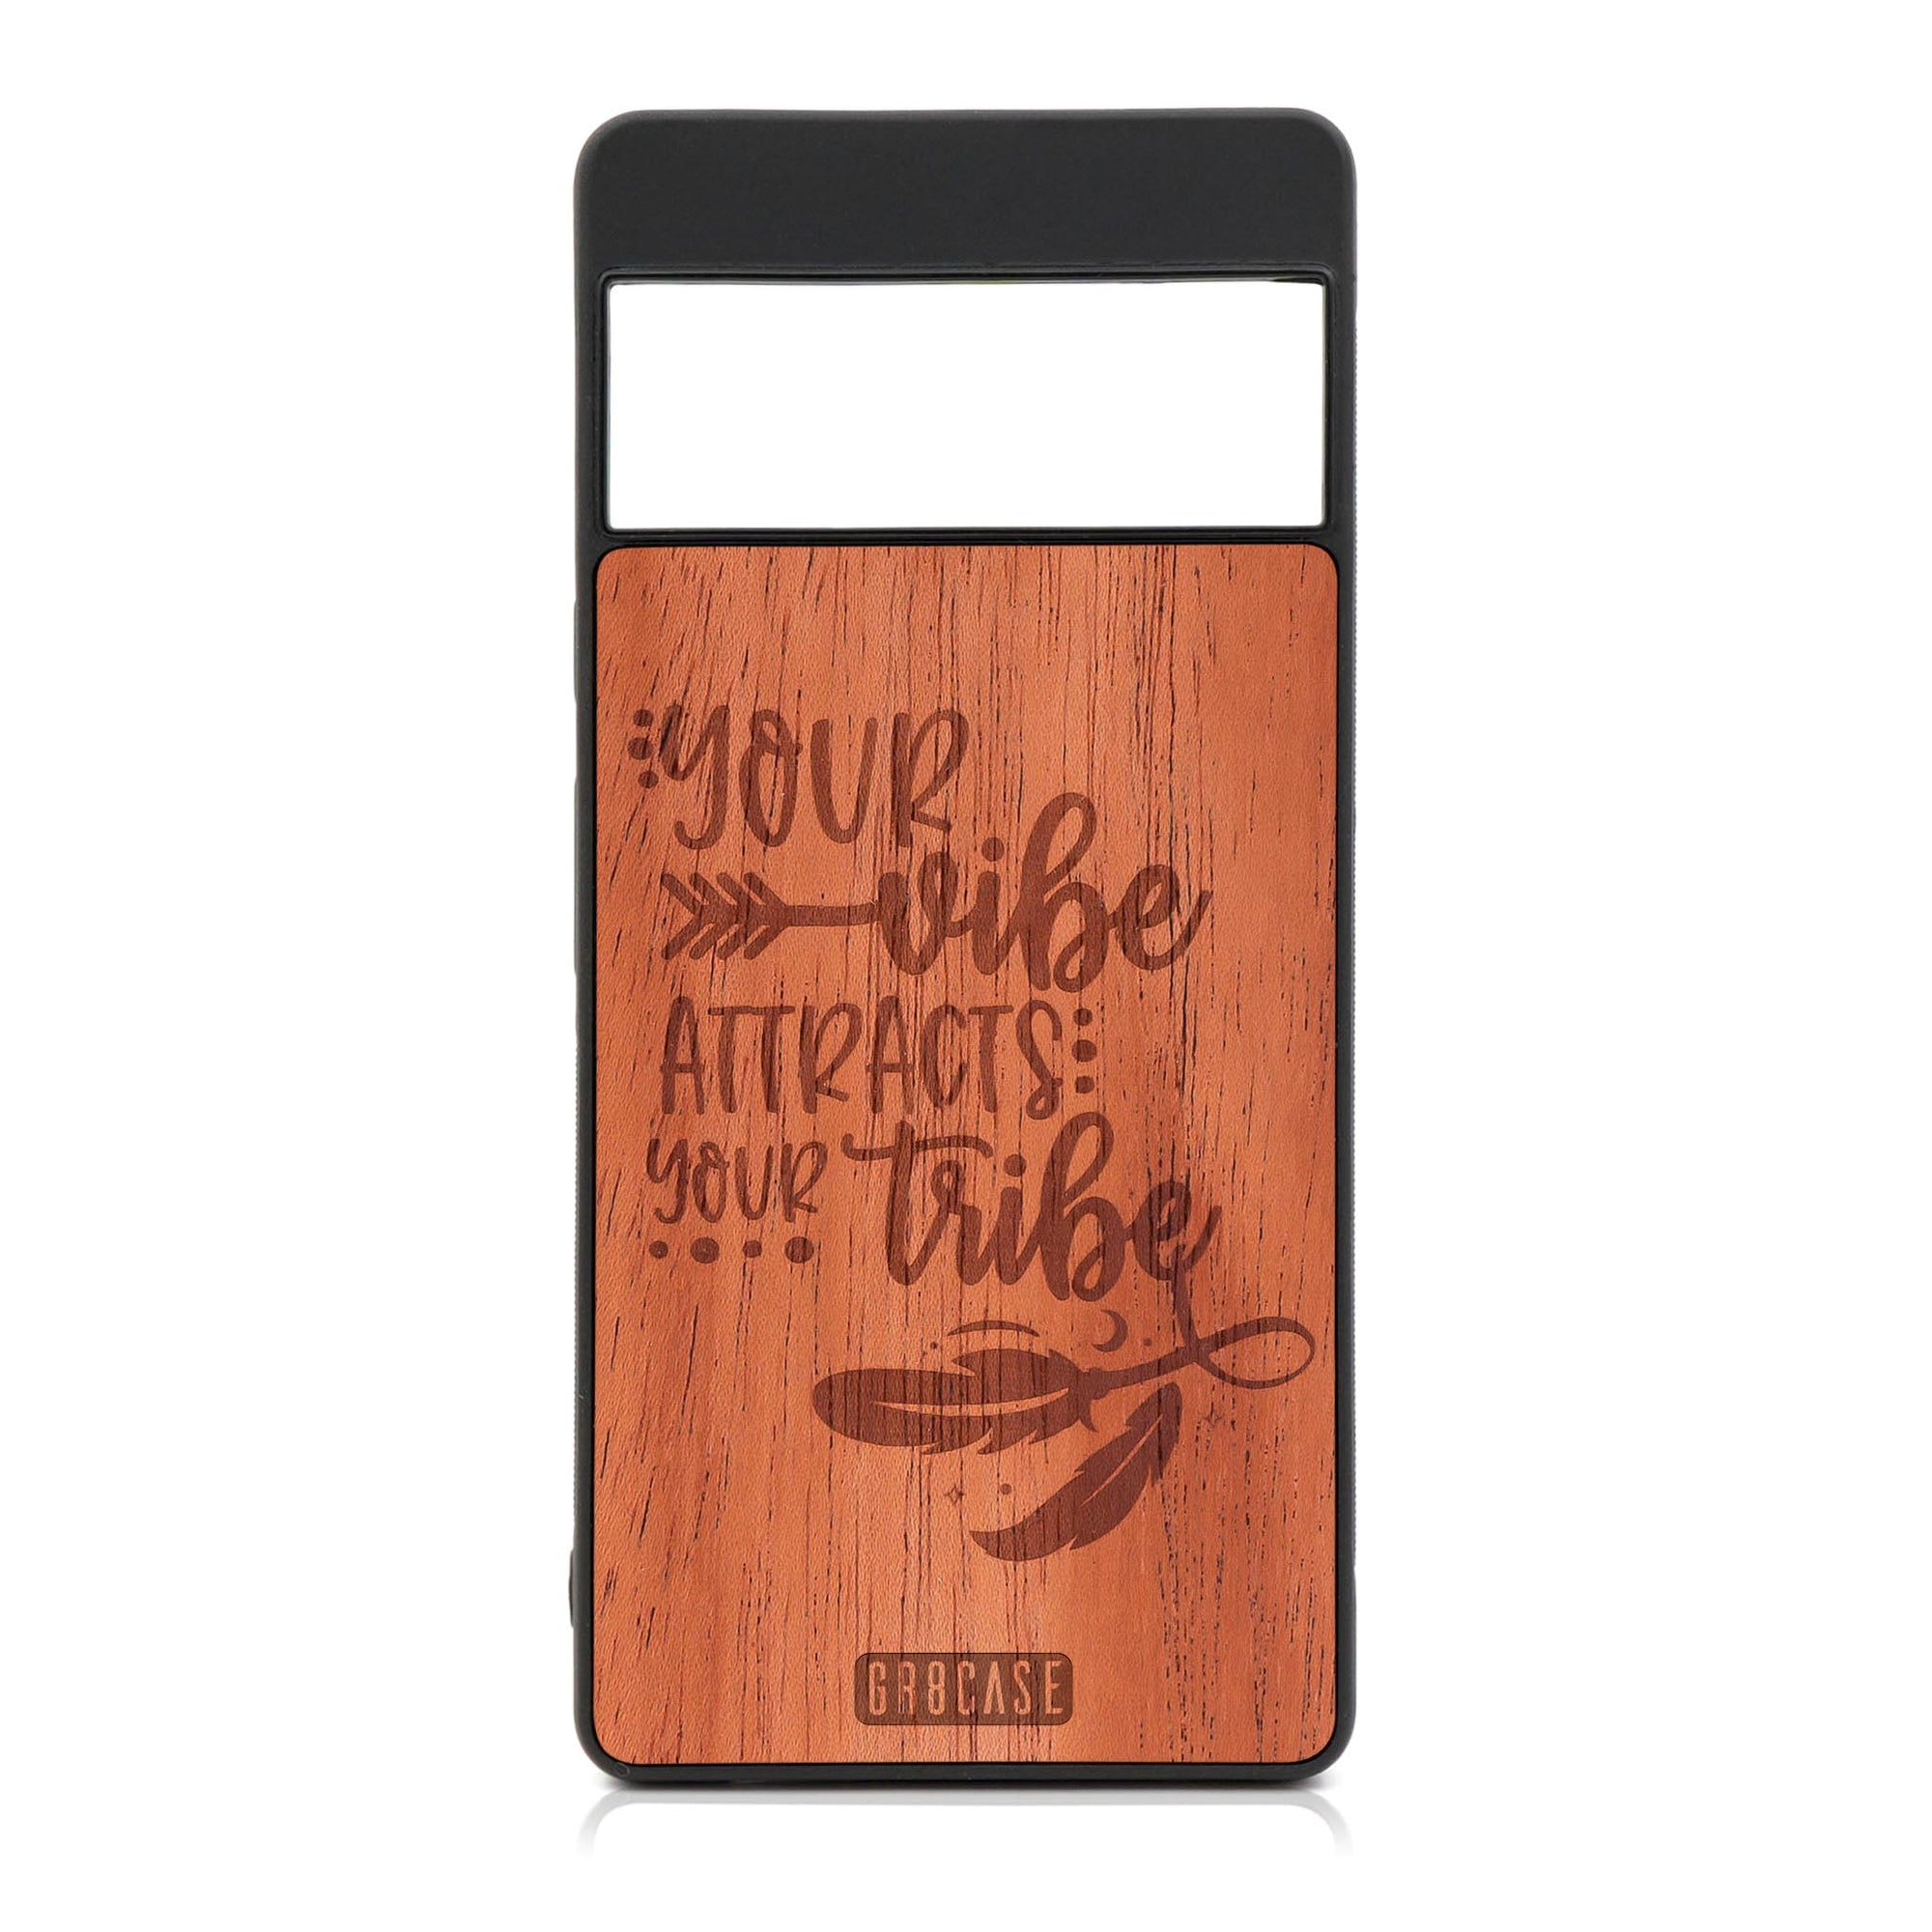 Your Vibe Attracts Your Tribe Design Wood Case For Google Pixel 6 Pro